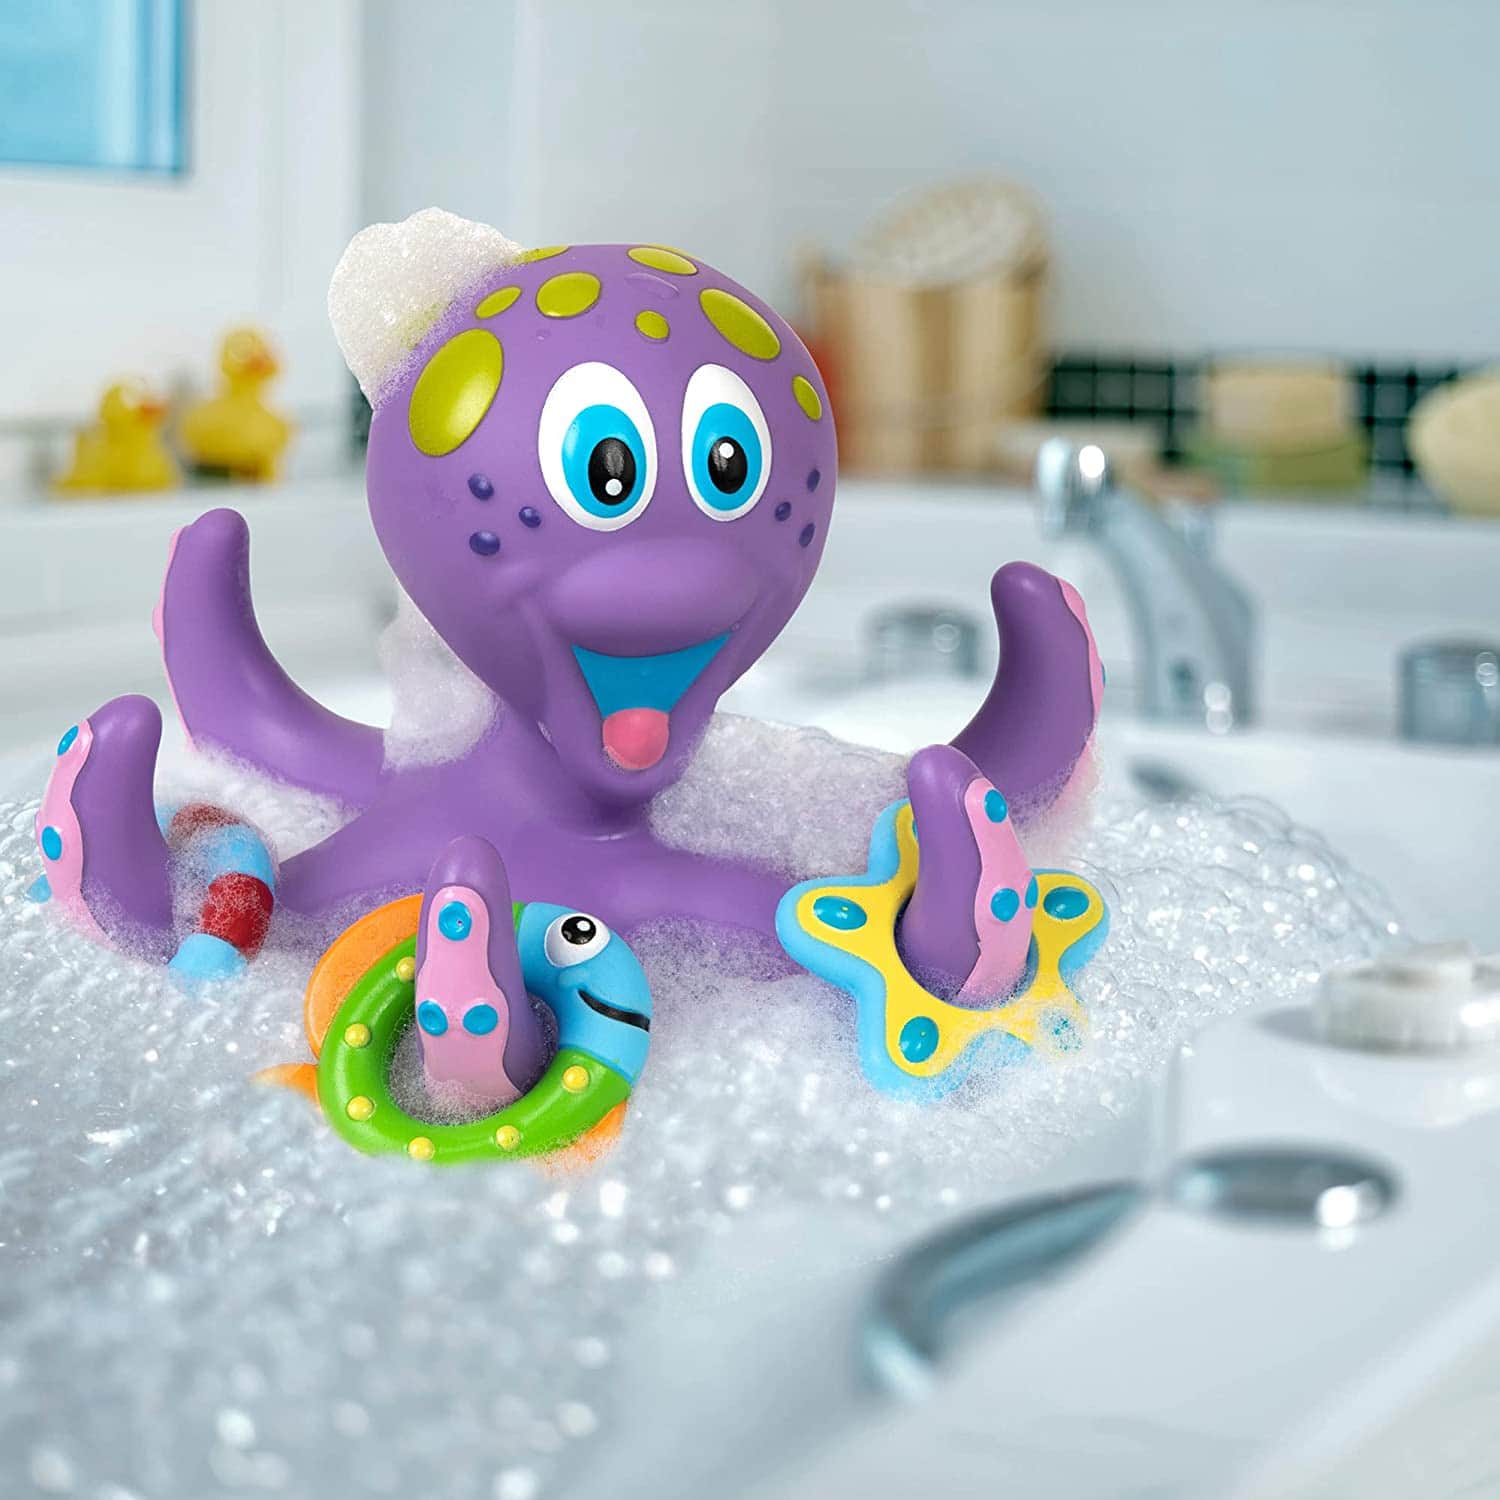 Purple toy octopus in bath water with green polka dots and toy rings on its tentacles. 